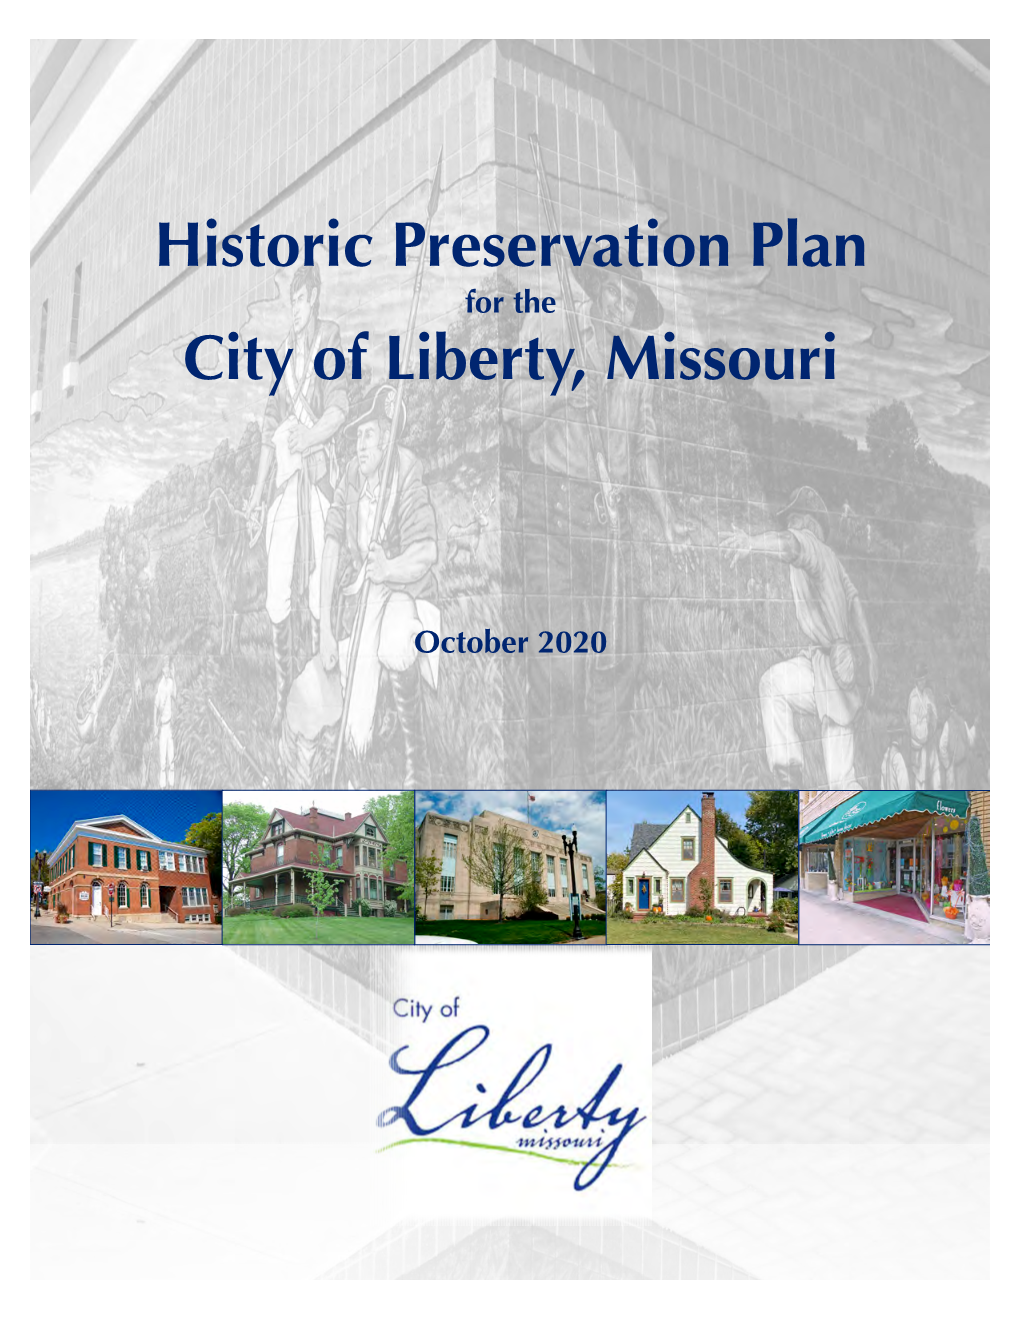 Historic Preservation Plan for the City of Liberty, Missouri